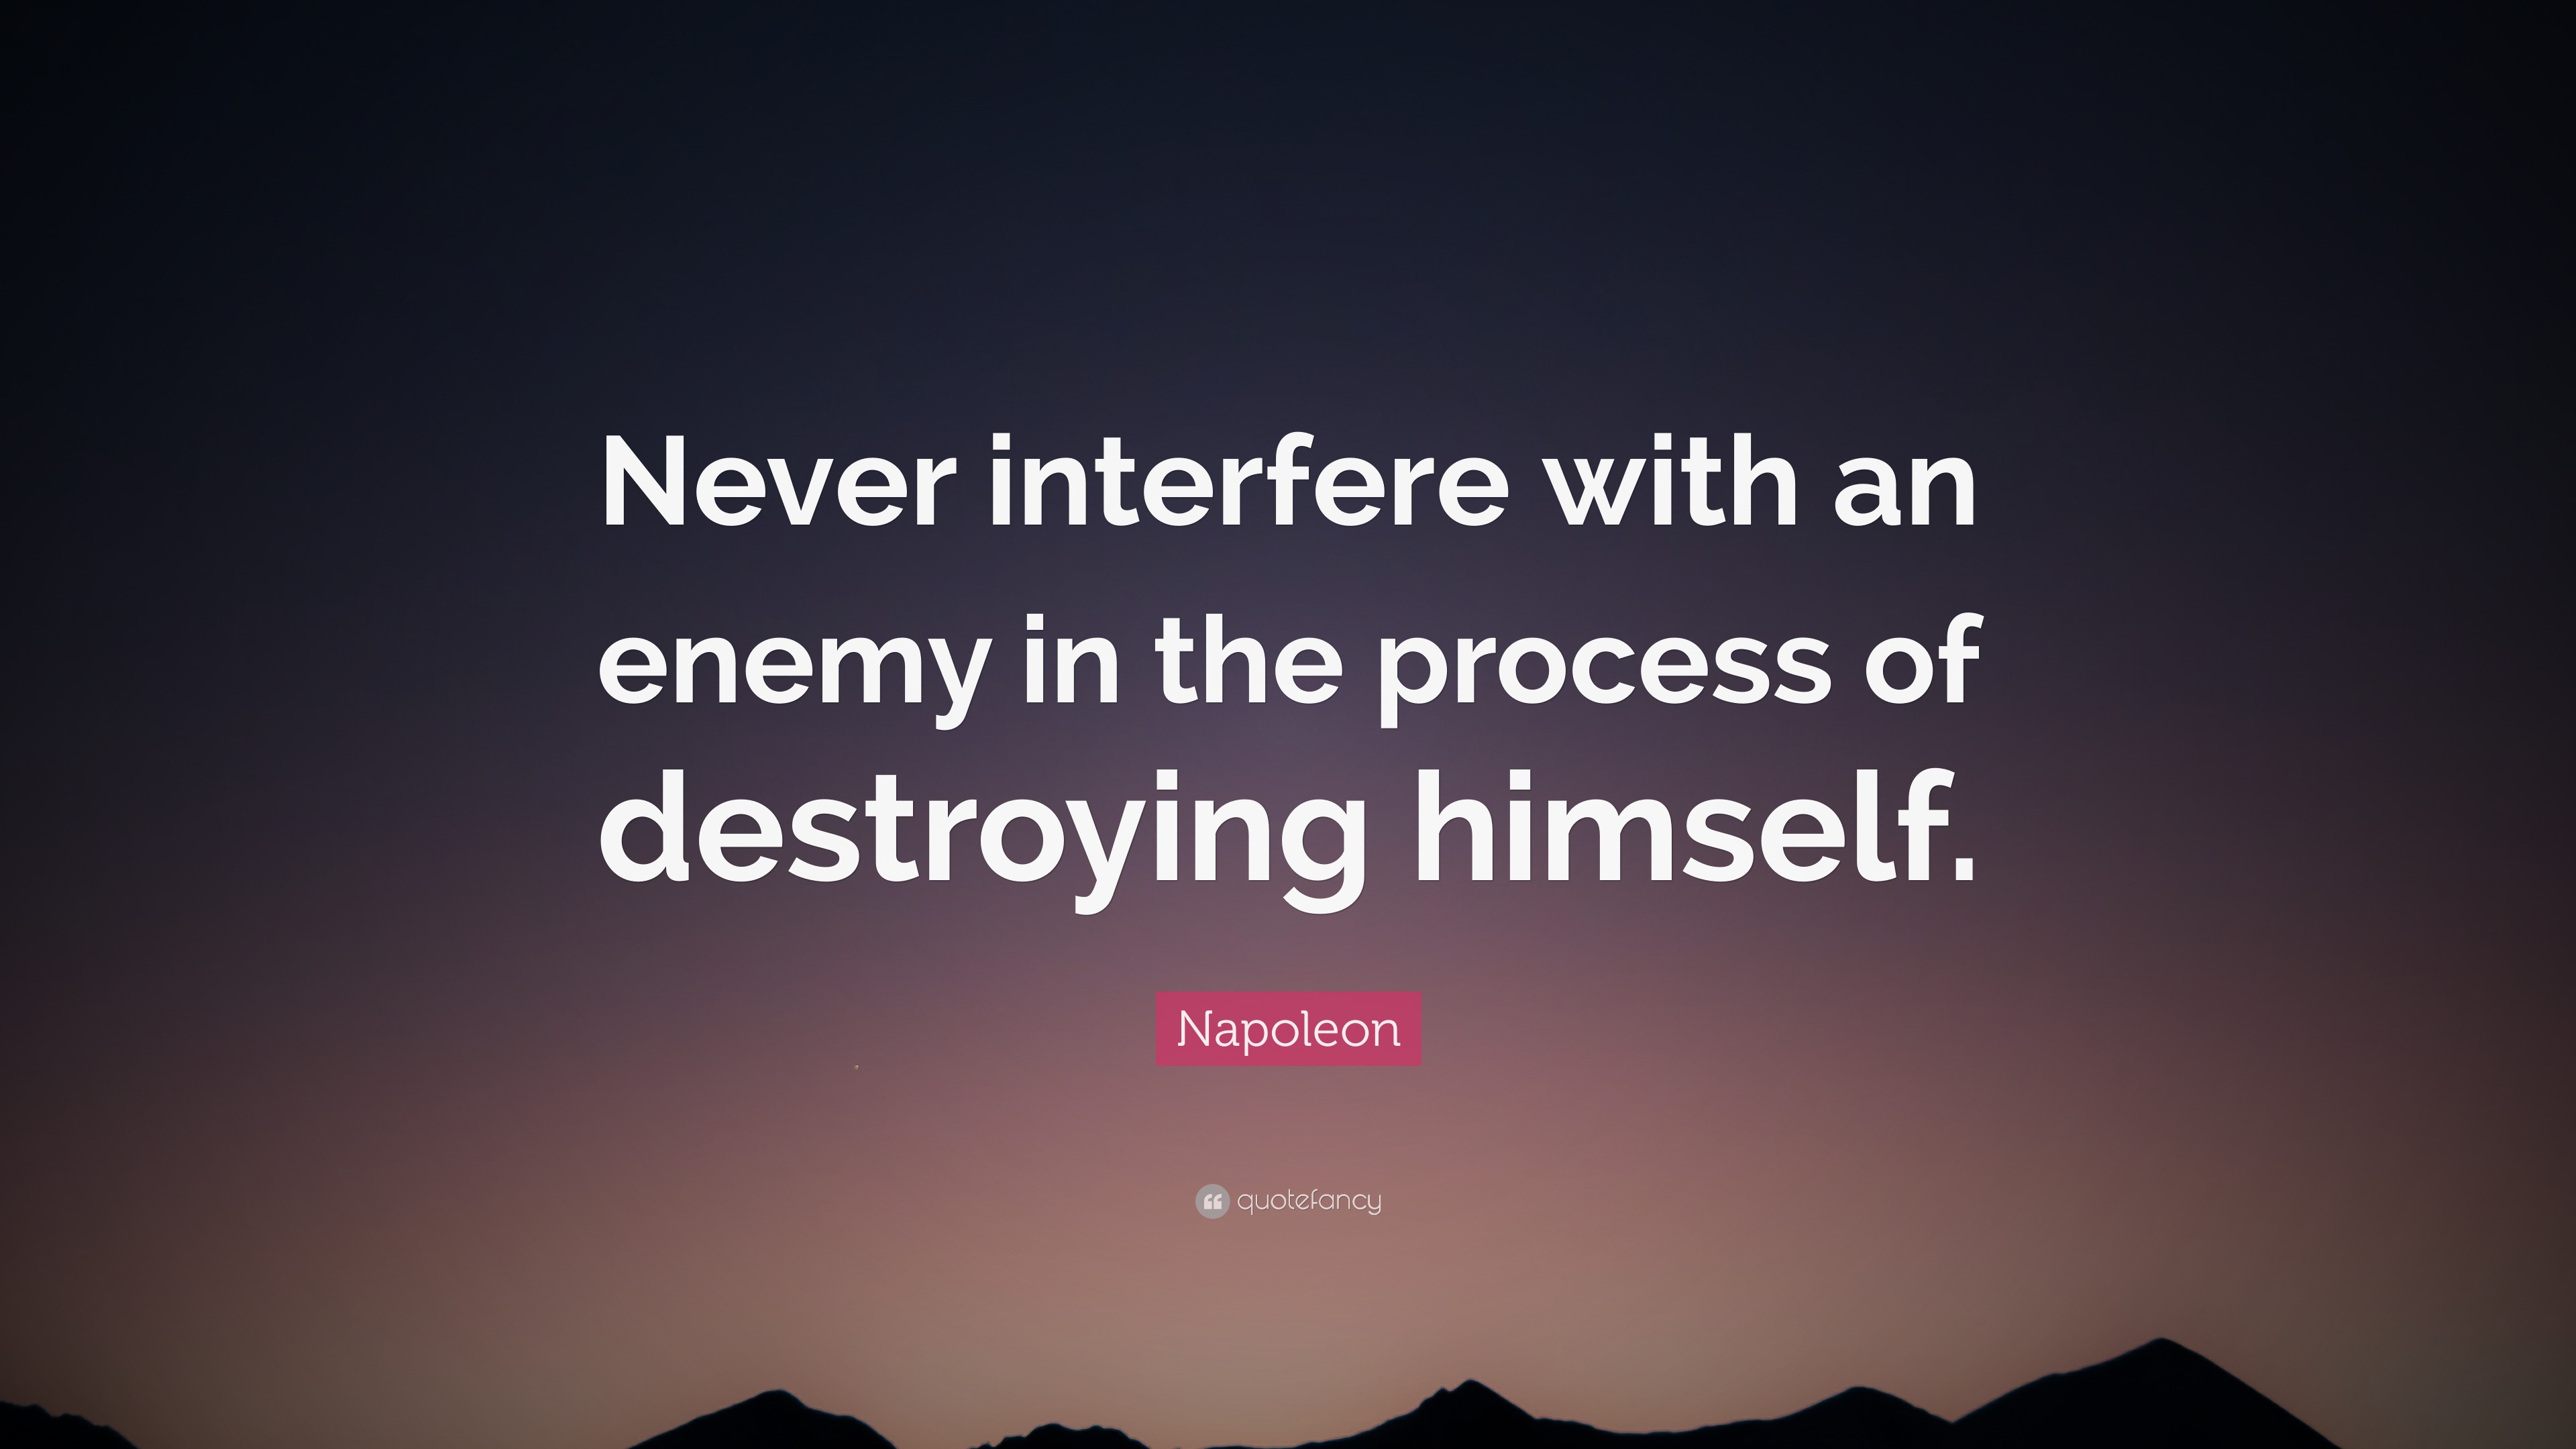 5047859-Napoleon-Quote-Never-interfere-with-an-enemy-in-the-process-of.jpg